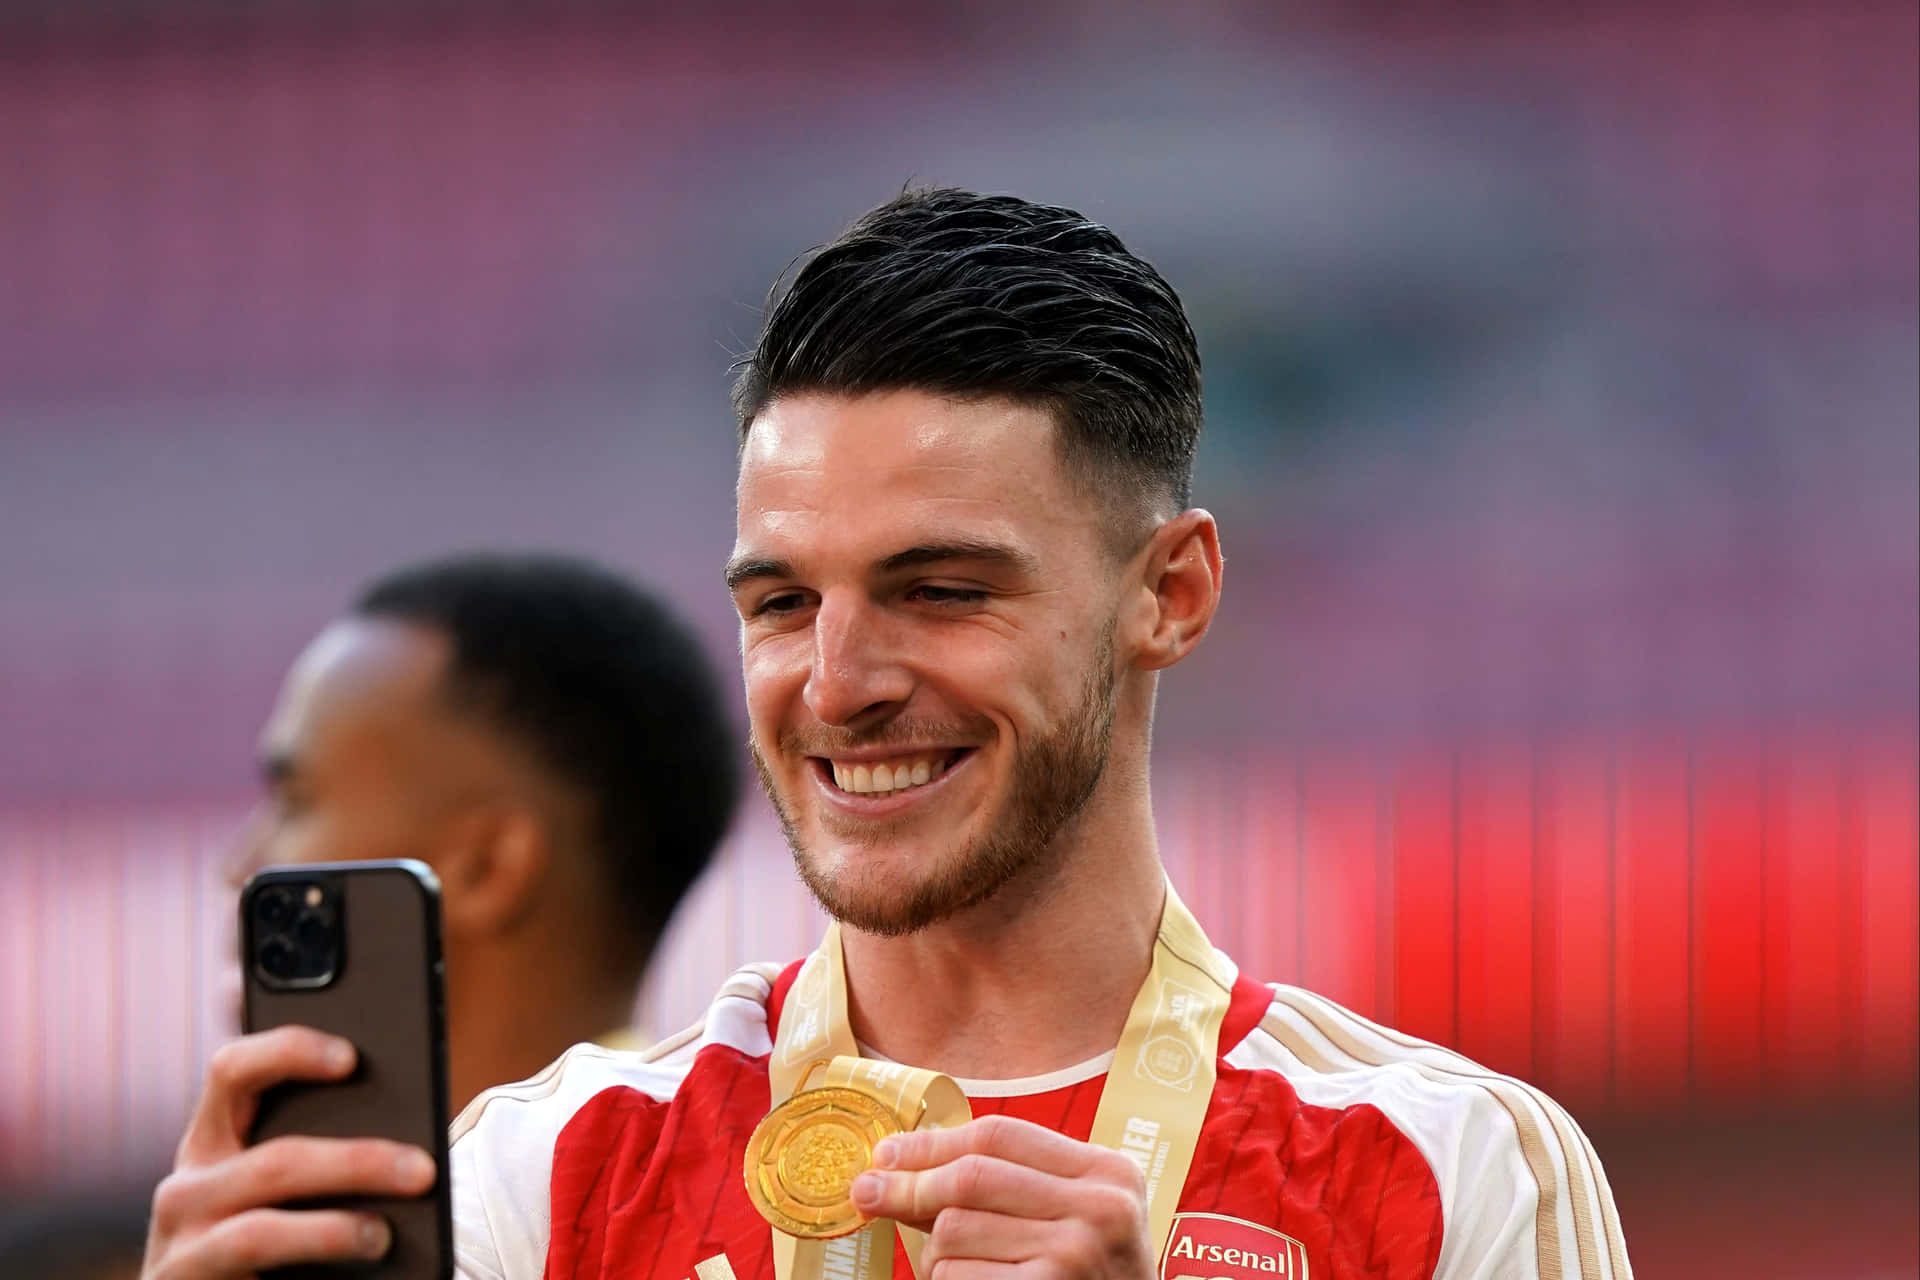 Smiling Athletewith Gold Medaland Smartphone Wallpaper